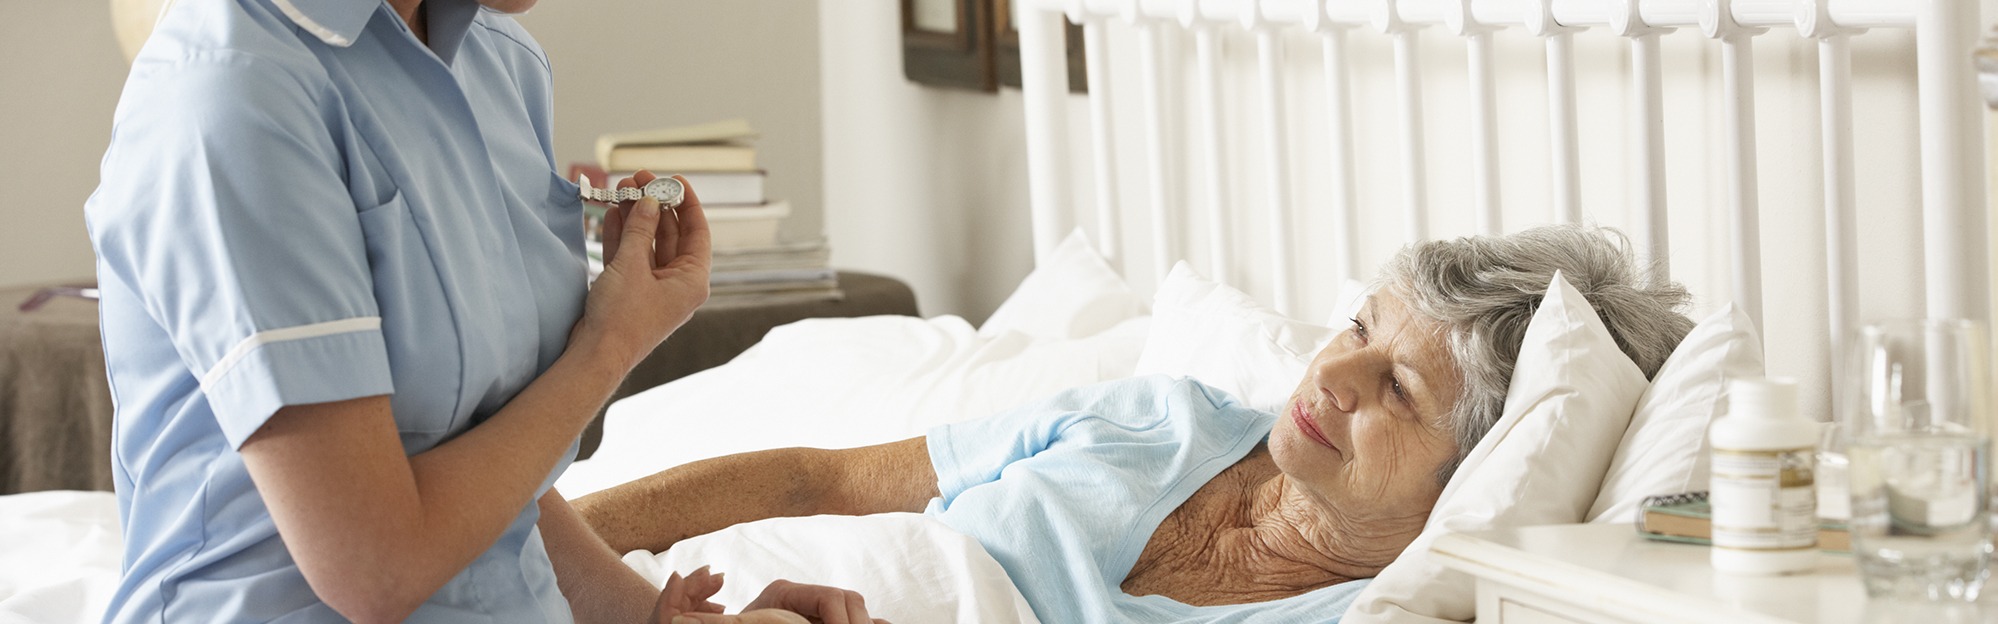 Care of terminally ill patients requires a holistic approach, argues award-winning study.